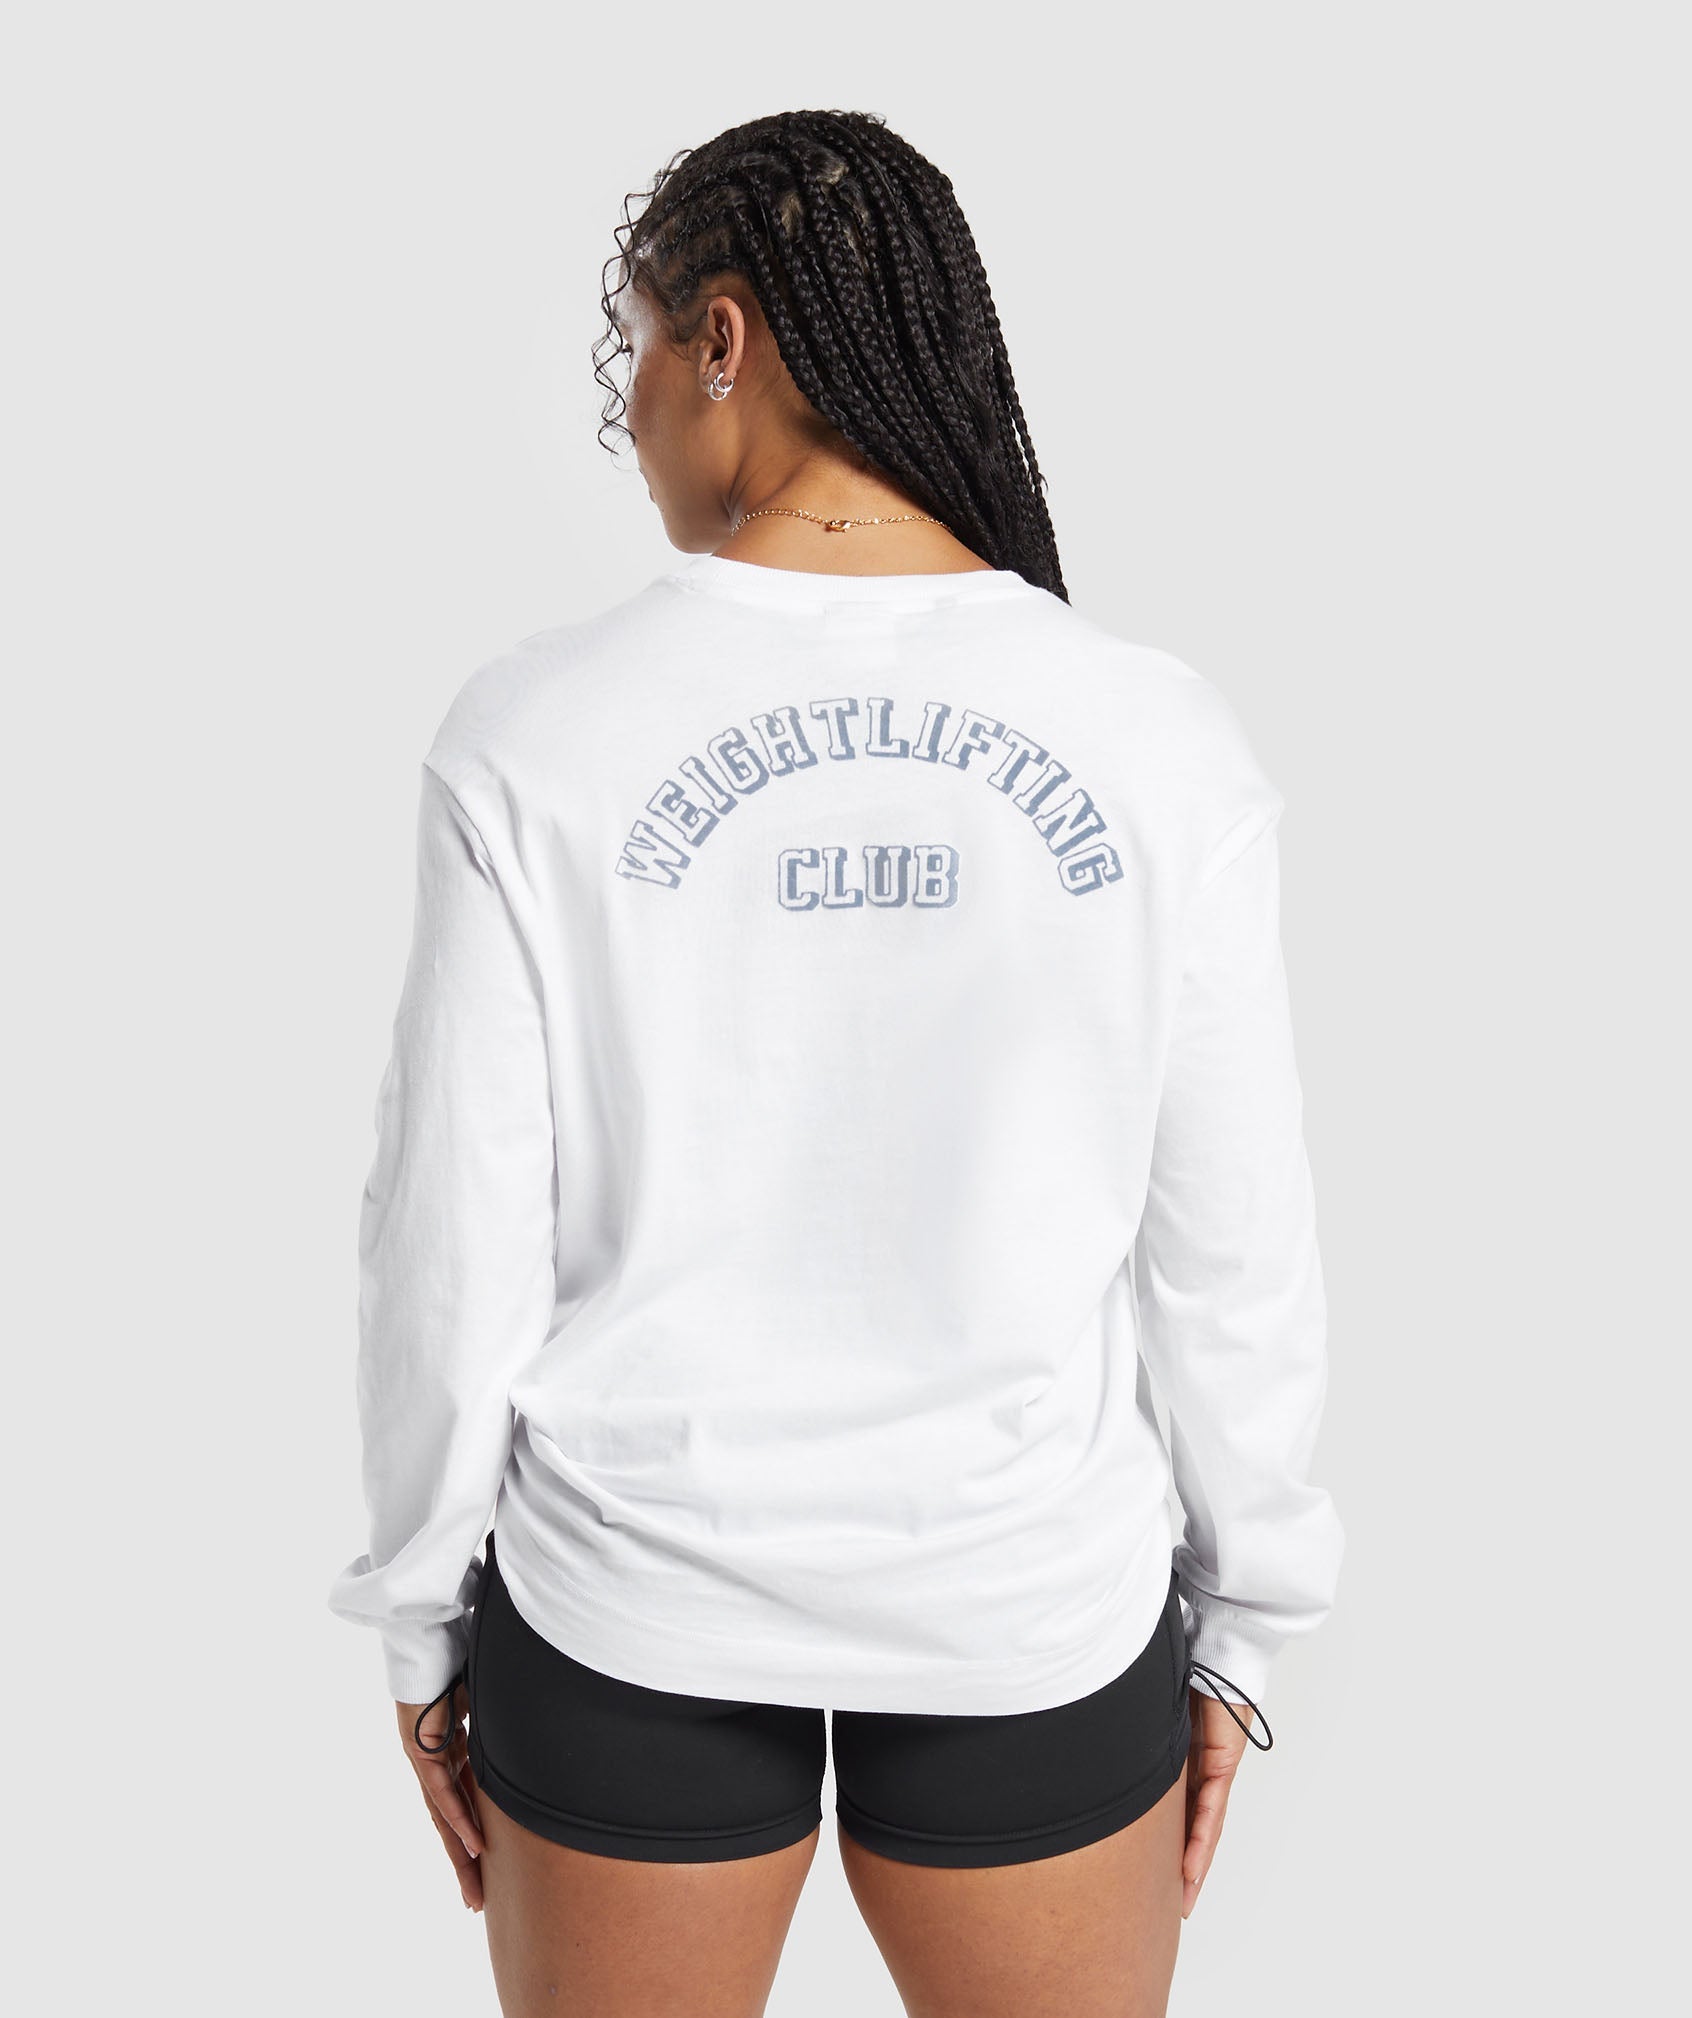 Weightlifting Long Sleeve Top in White - view 1